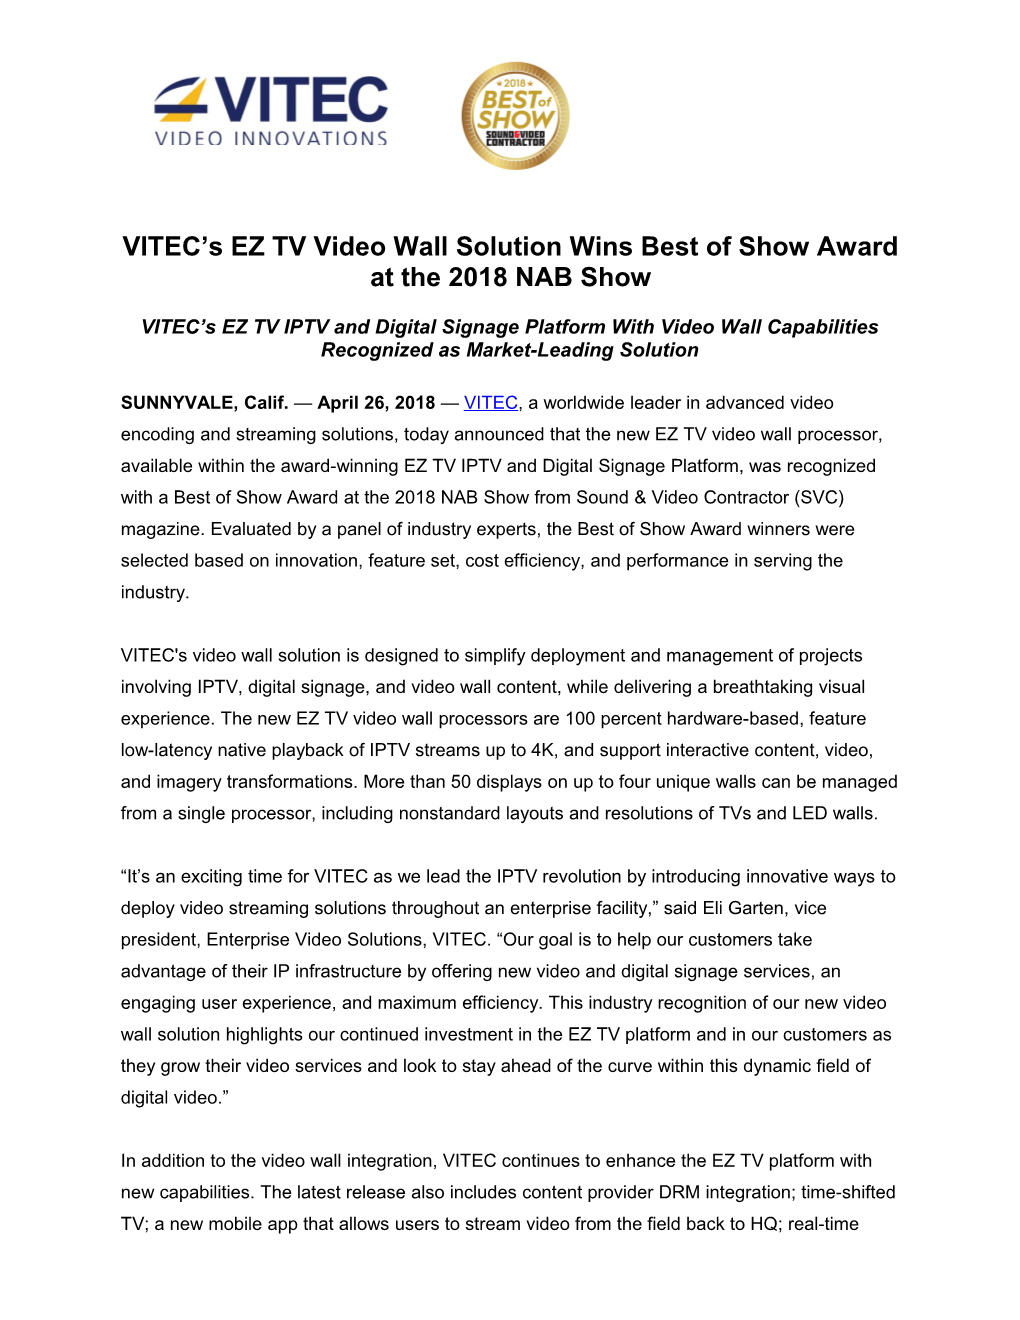 VITEC S EZ TV Video Wall Solution Wins Best of Showaward at the 2018 NAB Show